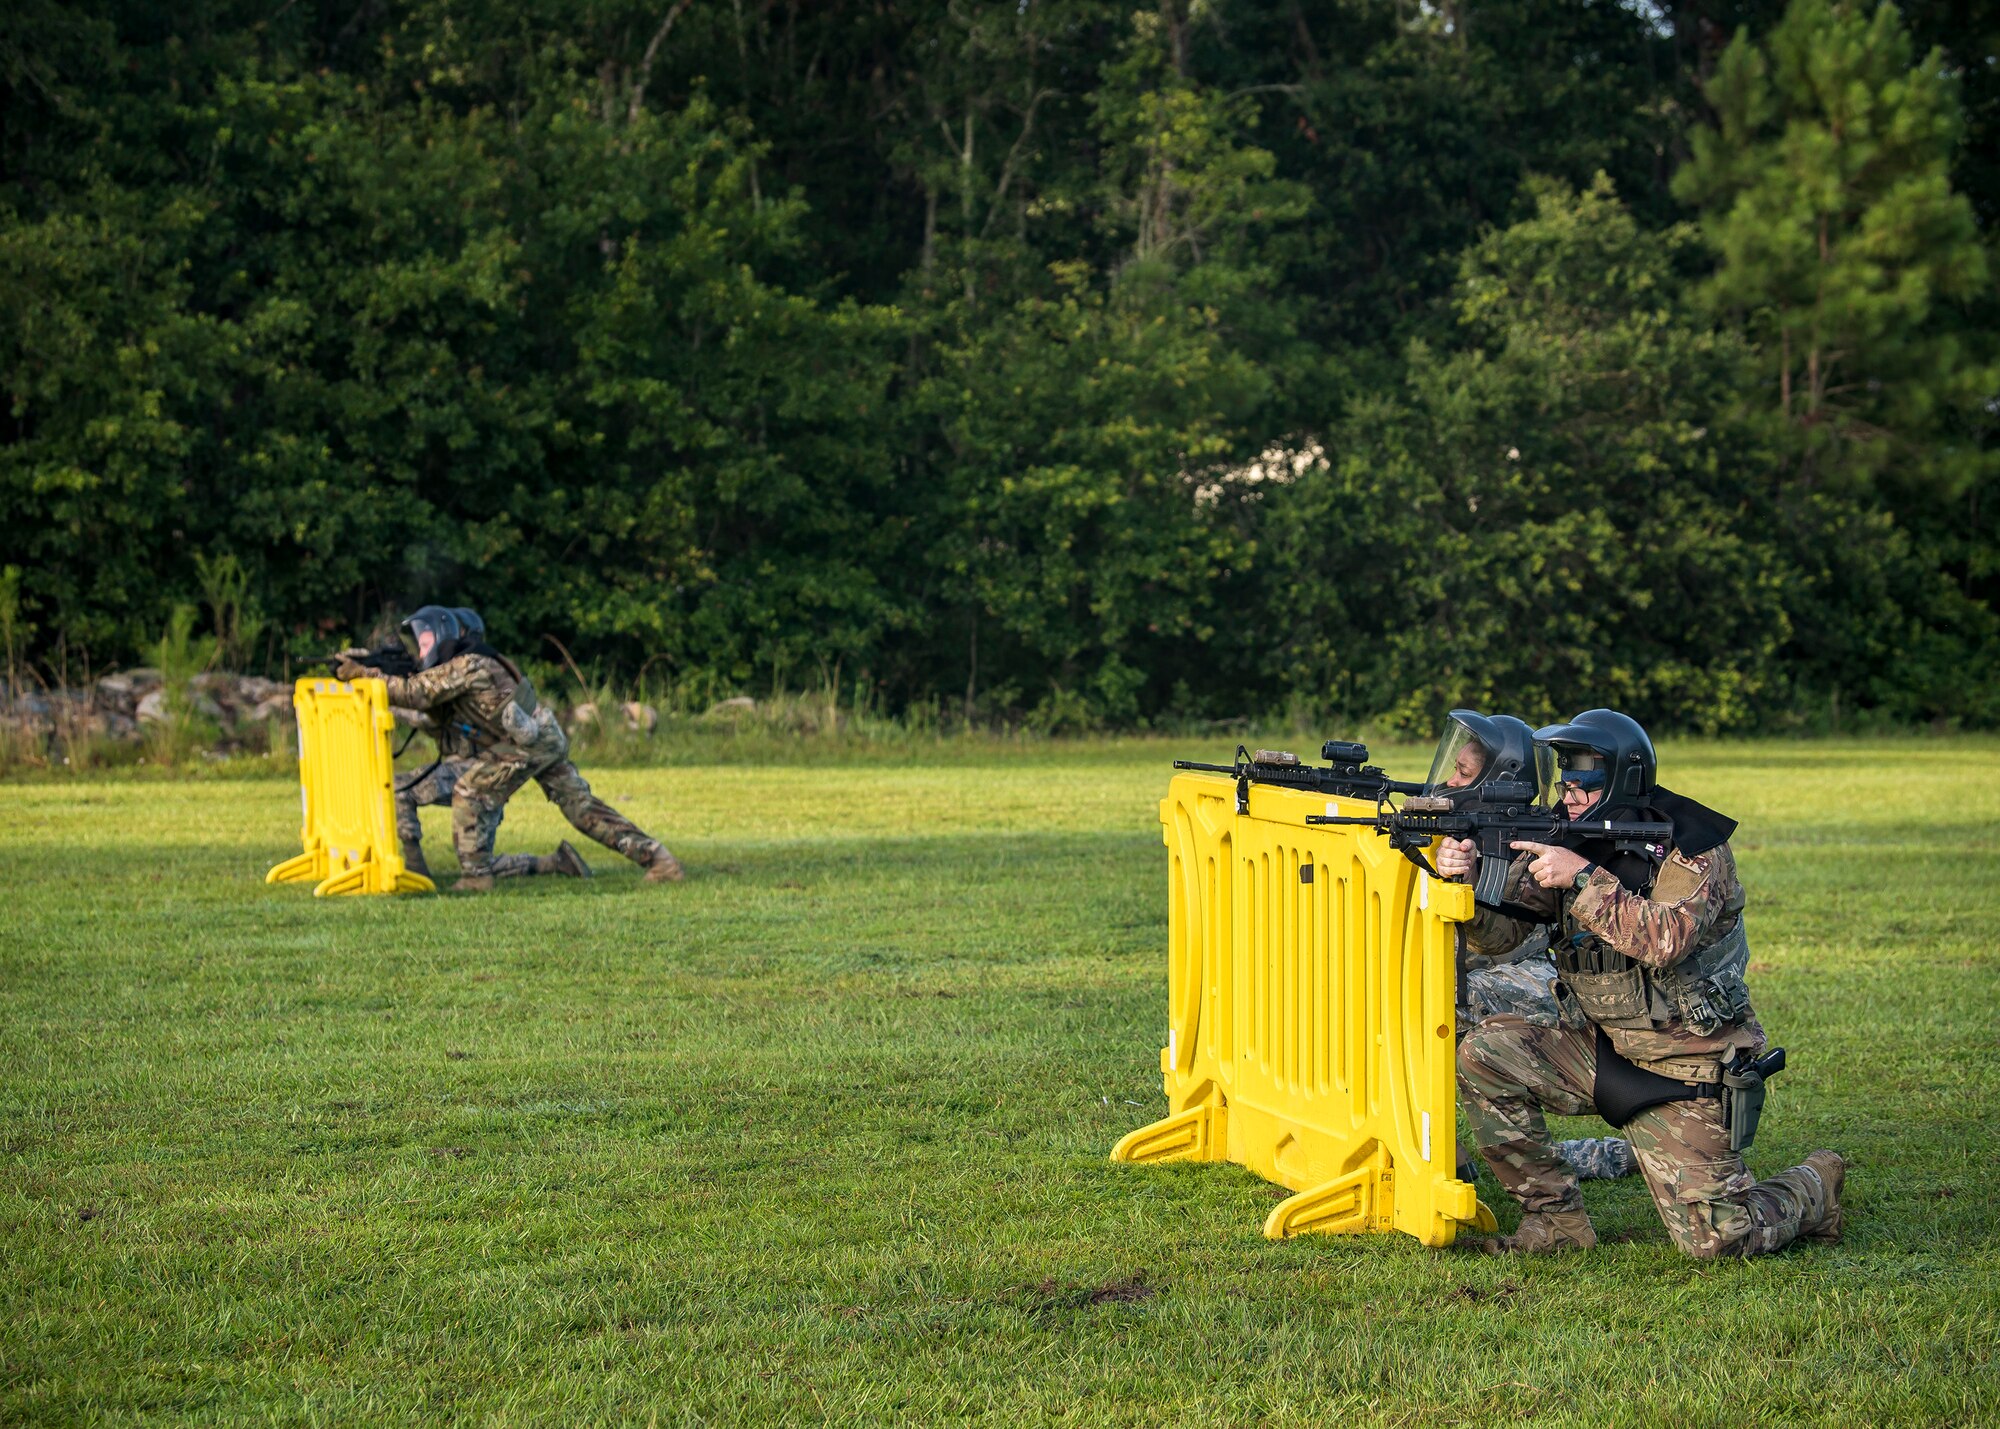 Airmen from the 23d Security Forces Squadron (SFS), defend their positions during a training exercise, July 15, 2019, at Moody Air Force Base, Ga. The “Shoot, move, communicate” training exercise put participants through practice maneuvers taking turns providing cover fire while others advanced on the enemy. Airmen learned how to shoot, move and communicate to build confidence in themselves, their wingmen and with their weapons. (U.S. Air Force photo by Airman 1st Class Eugene Oliver)